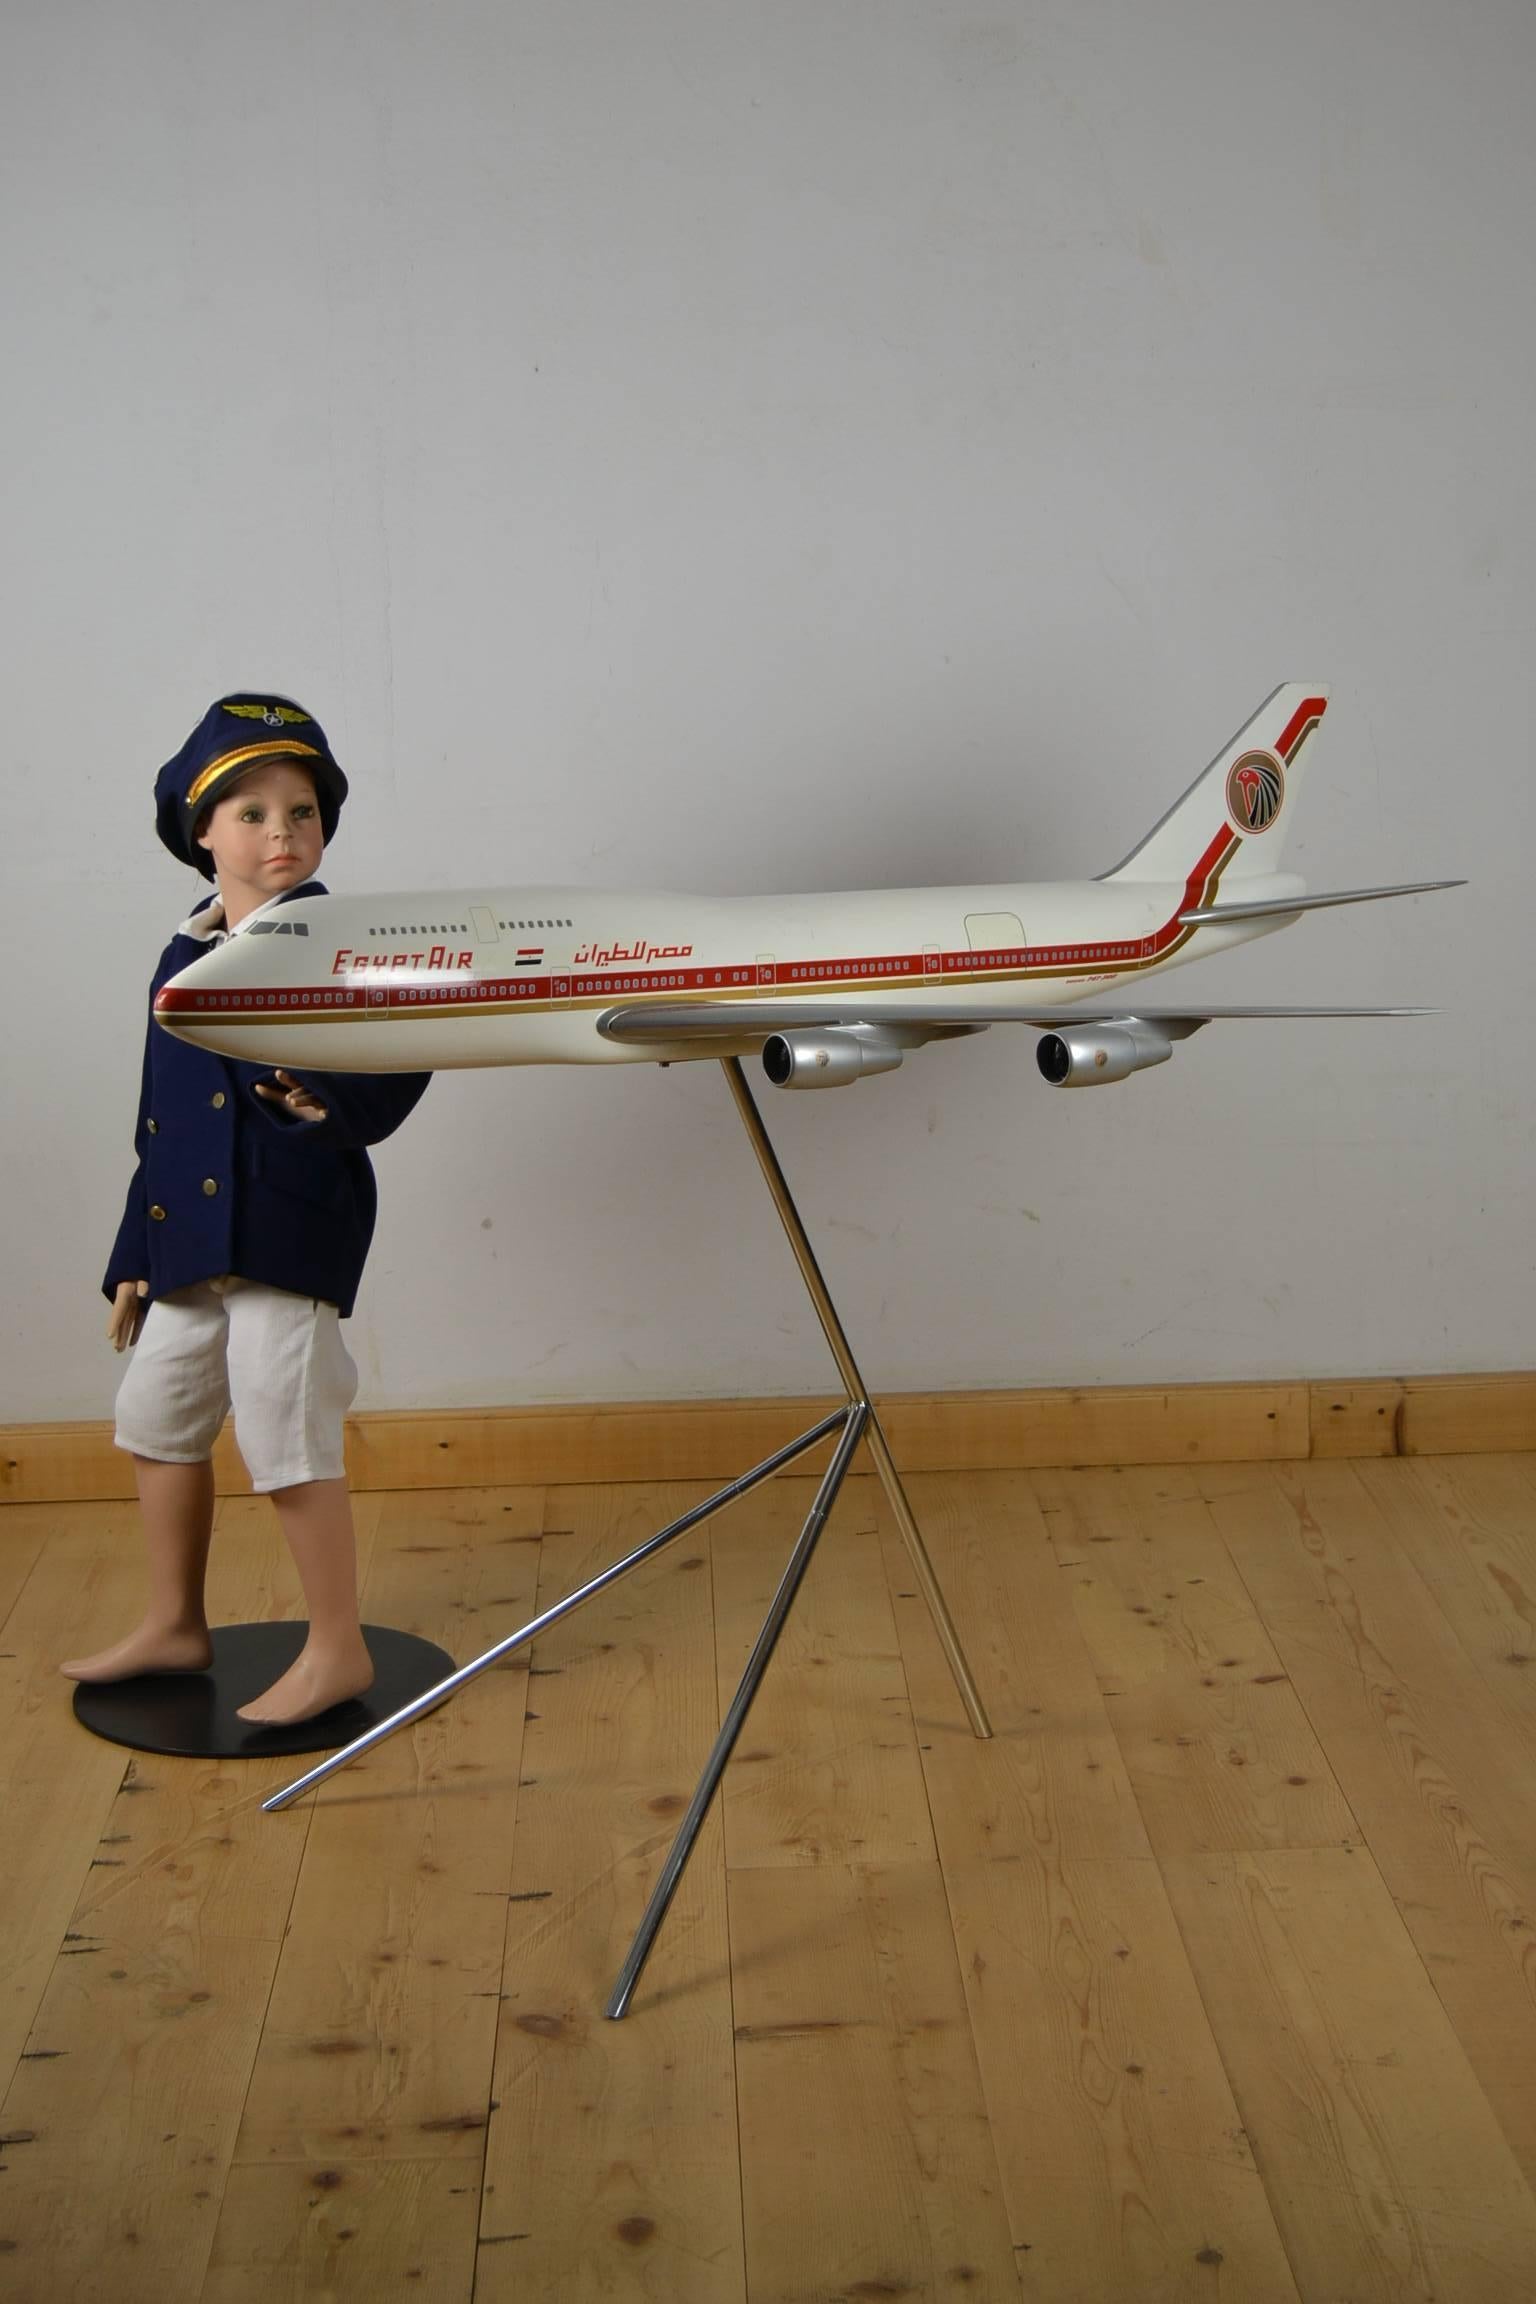 Impressive airplane scale model - promotional scale model for travel agency. 
Large display Type Boeing 747 - 300 for Egypt air. 
Wing span: 47.24 inch or 120 cm. 
Height: 39.37 inch or 100 cm. 
Width: 55.11 inch or 140 cm. 
Made of fibreglass